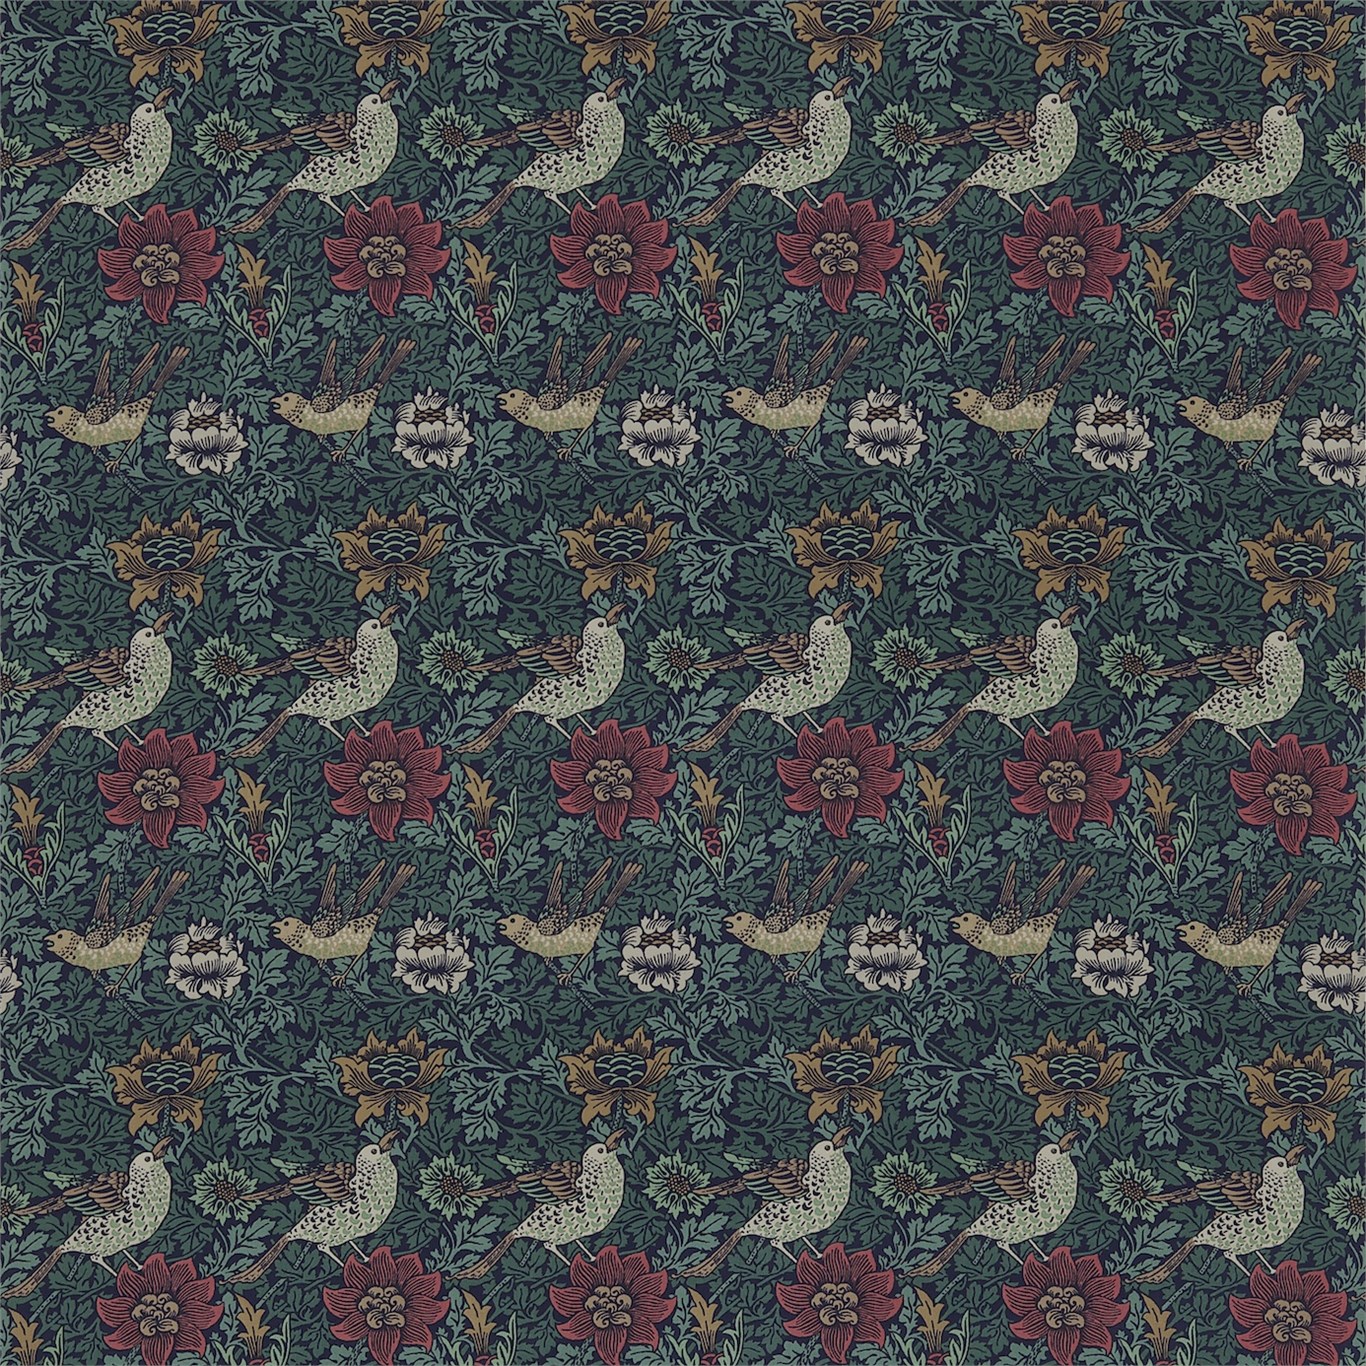 Bird & Anemone, A Fabric By Morris & Co - William Morris Bird And Anemone , HD Wallpaper & Backgrounds